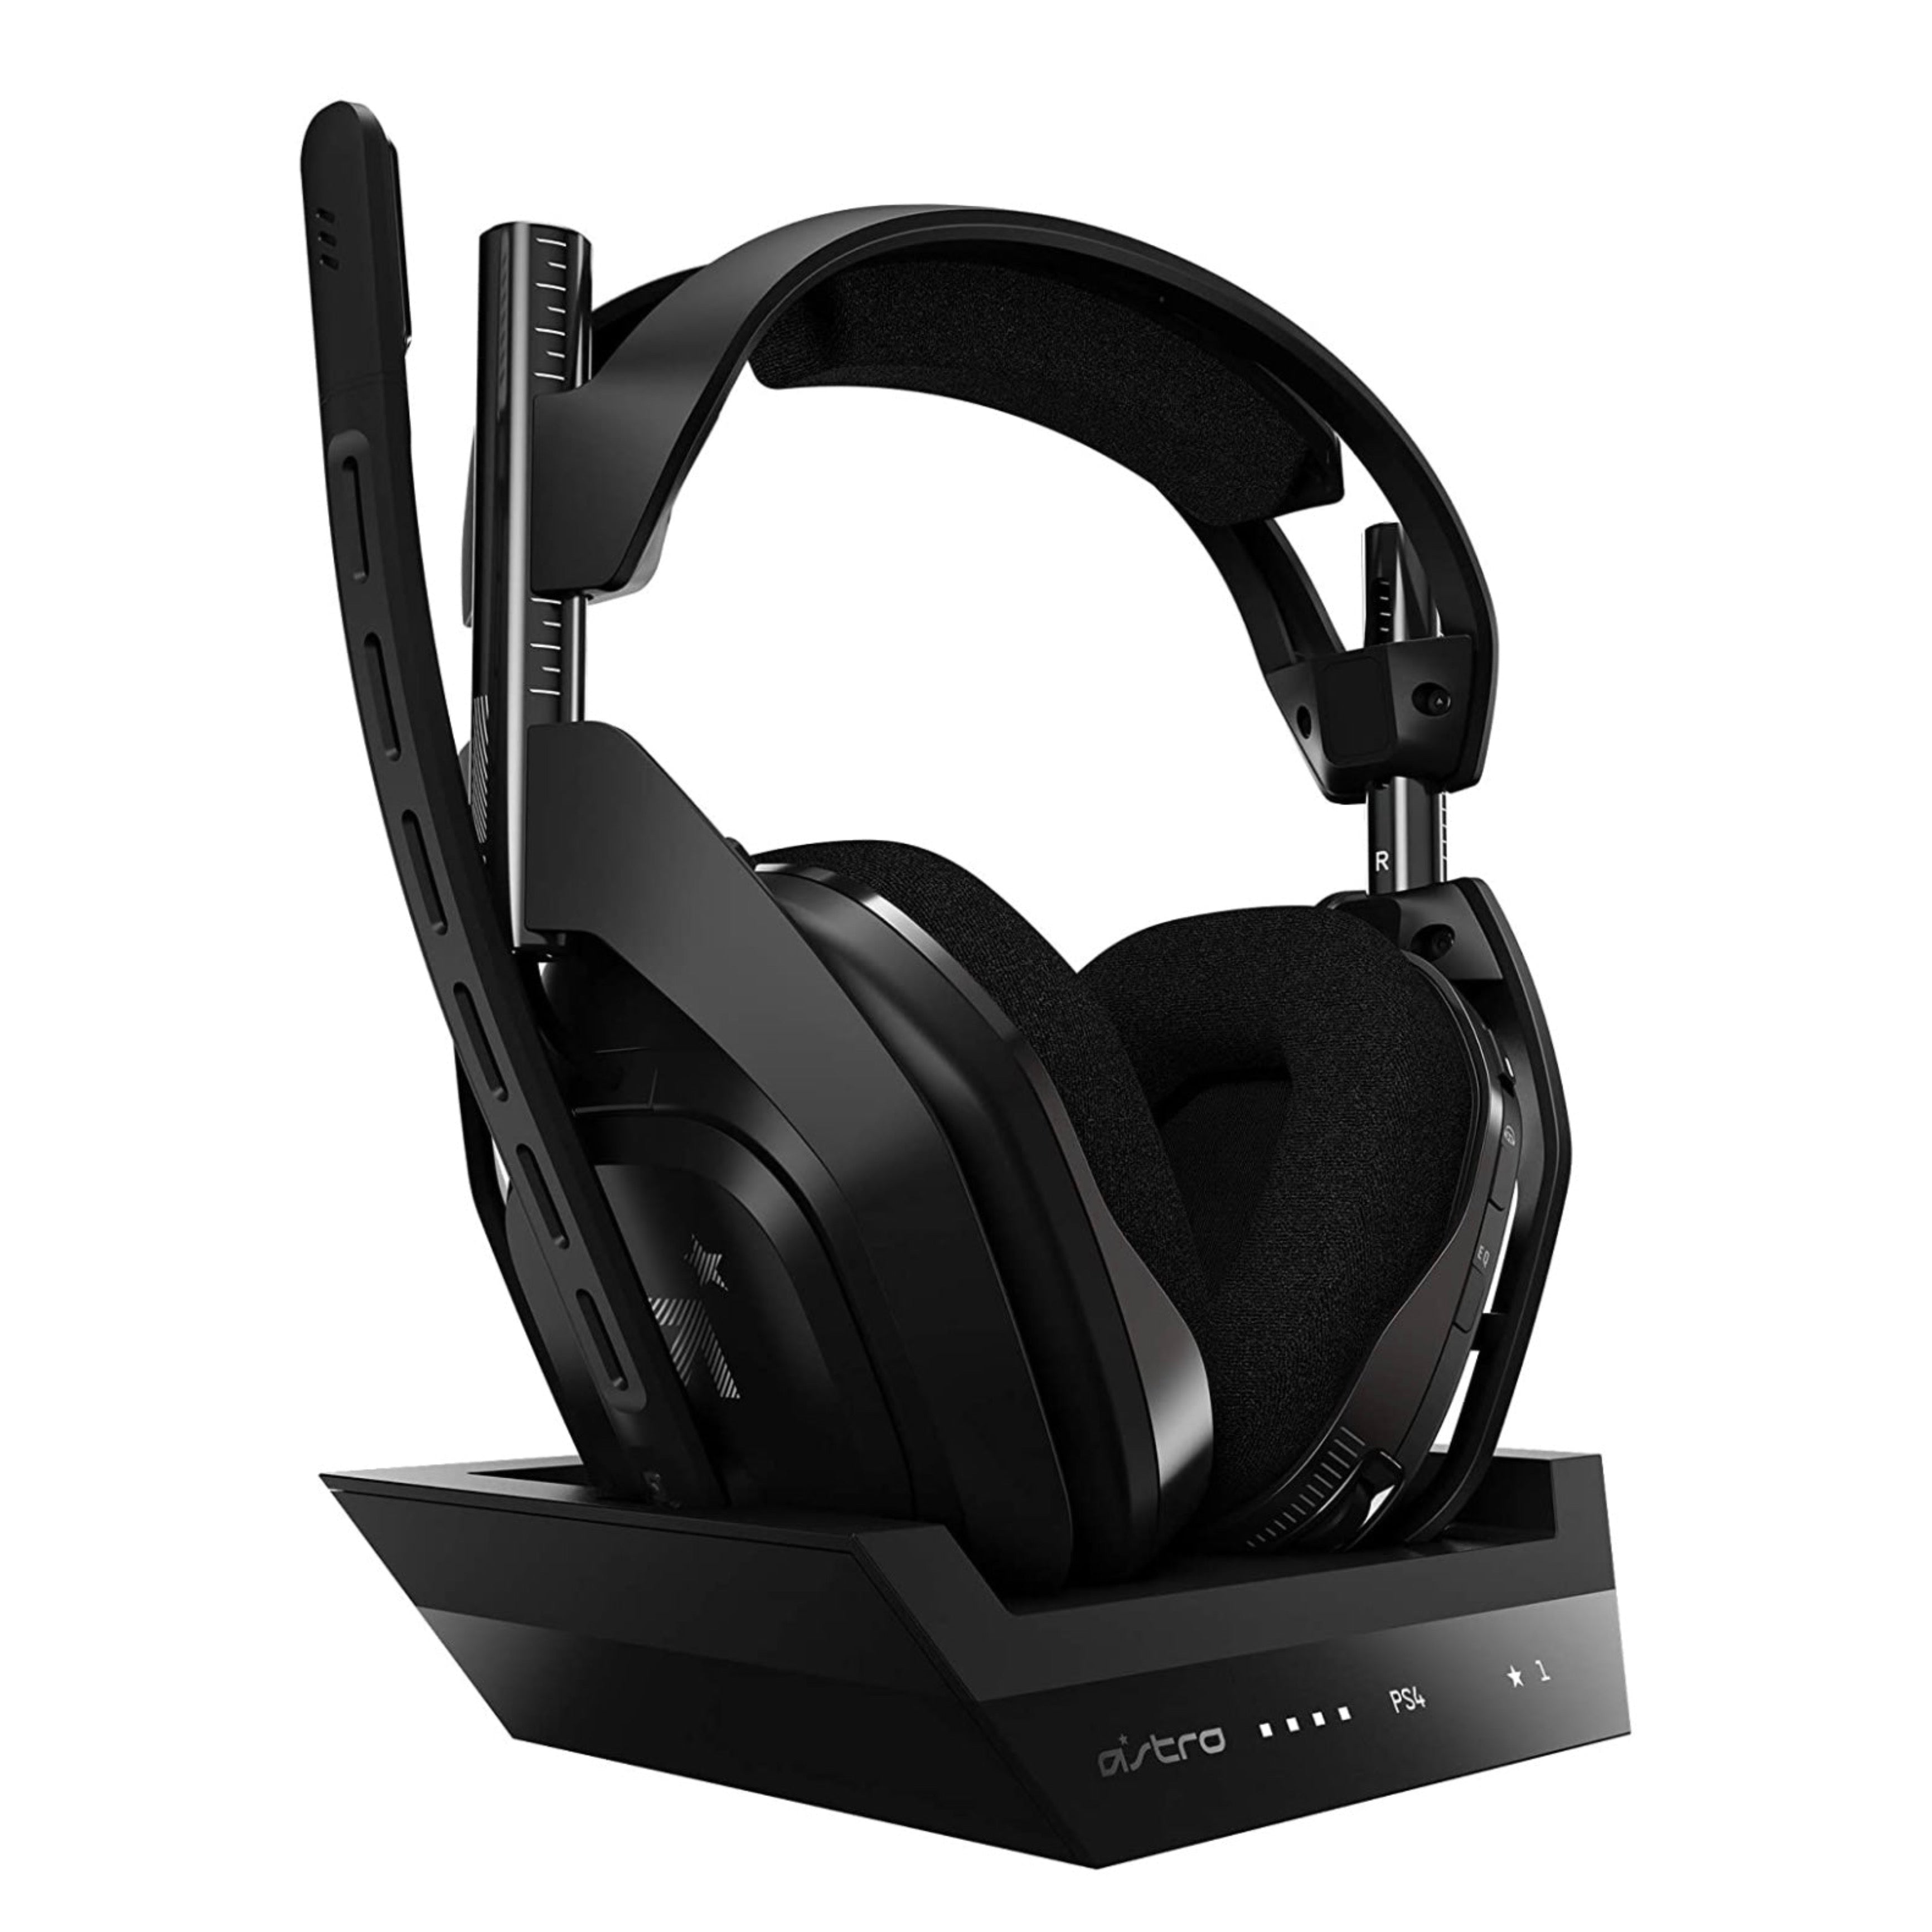 Astro A50 + Base Station RF Wireless Over-the-Ear Headphones for PS4, PC, and Mac